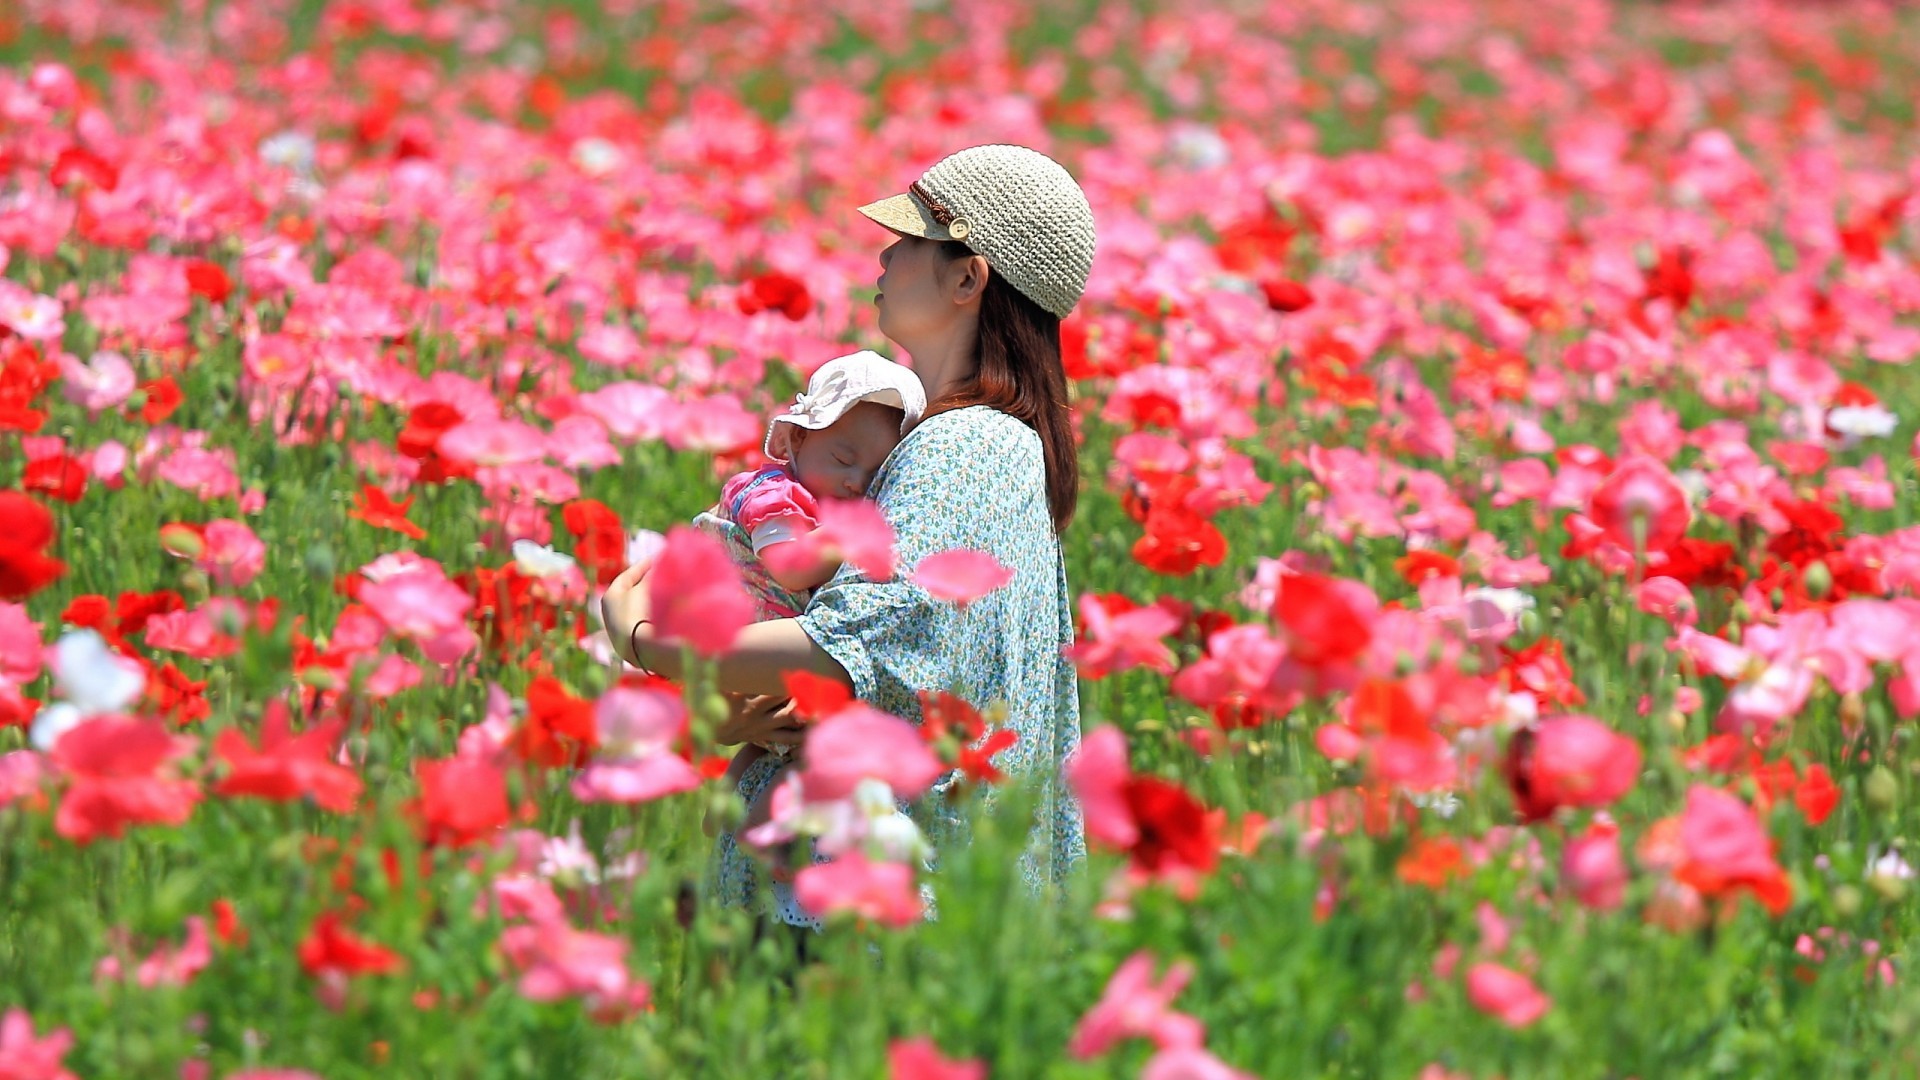 People 1920x1080 Asian baby field poppies women outdoors women flowers outdoors hat women with hats Mother plants colorful